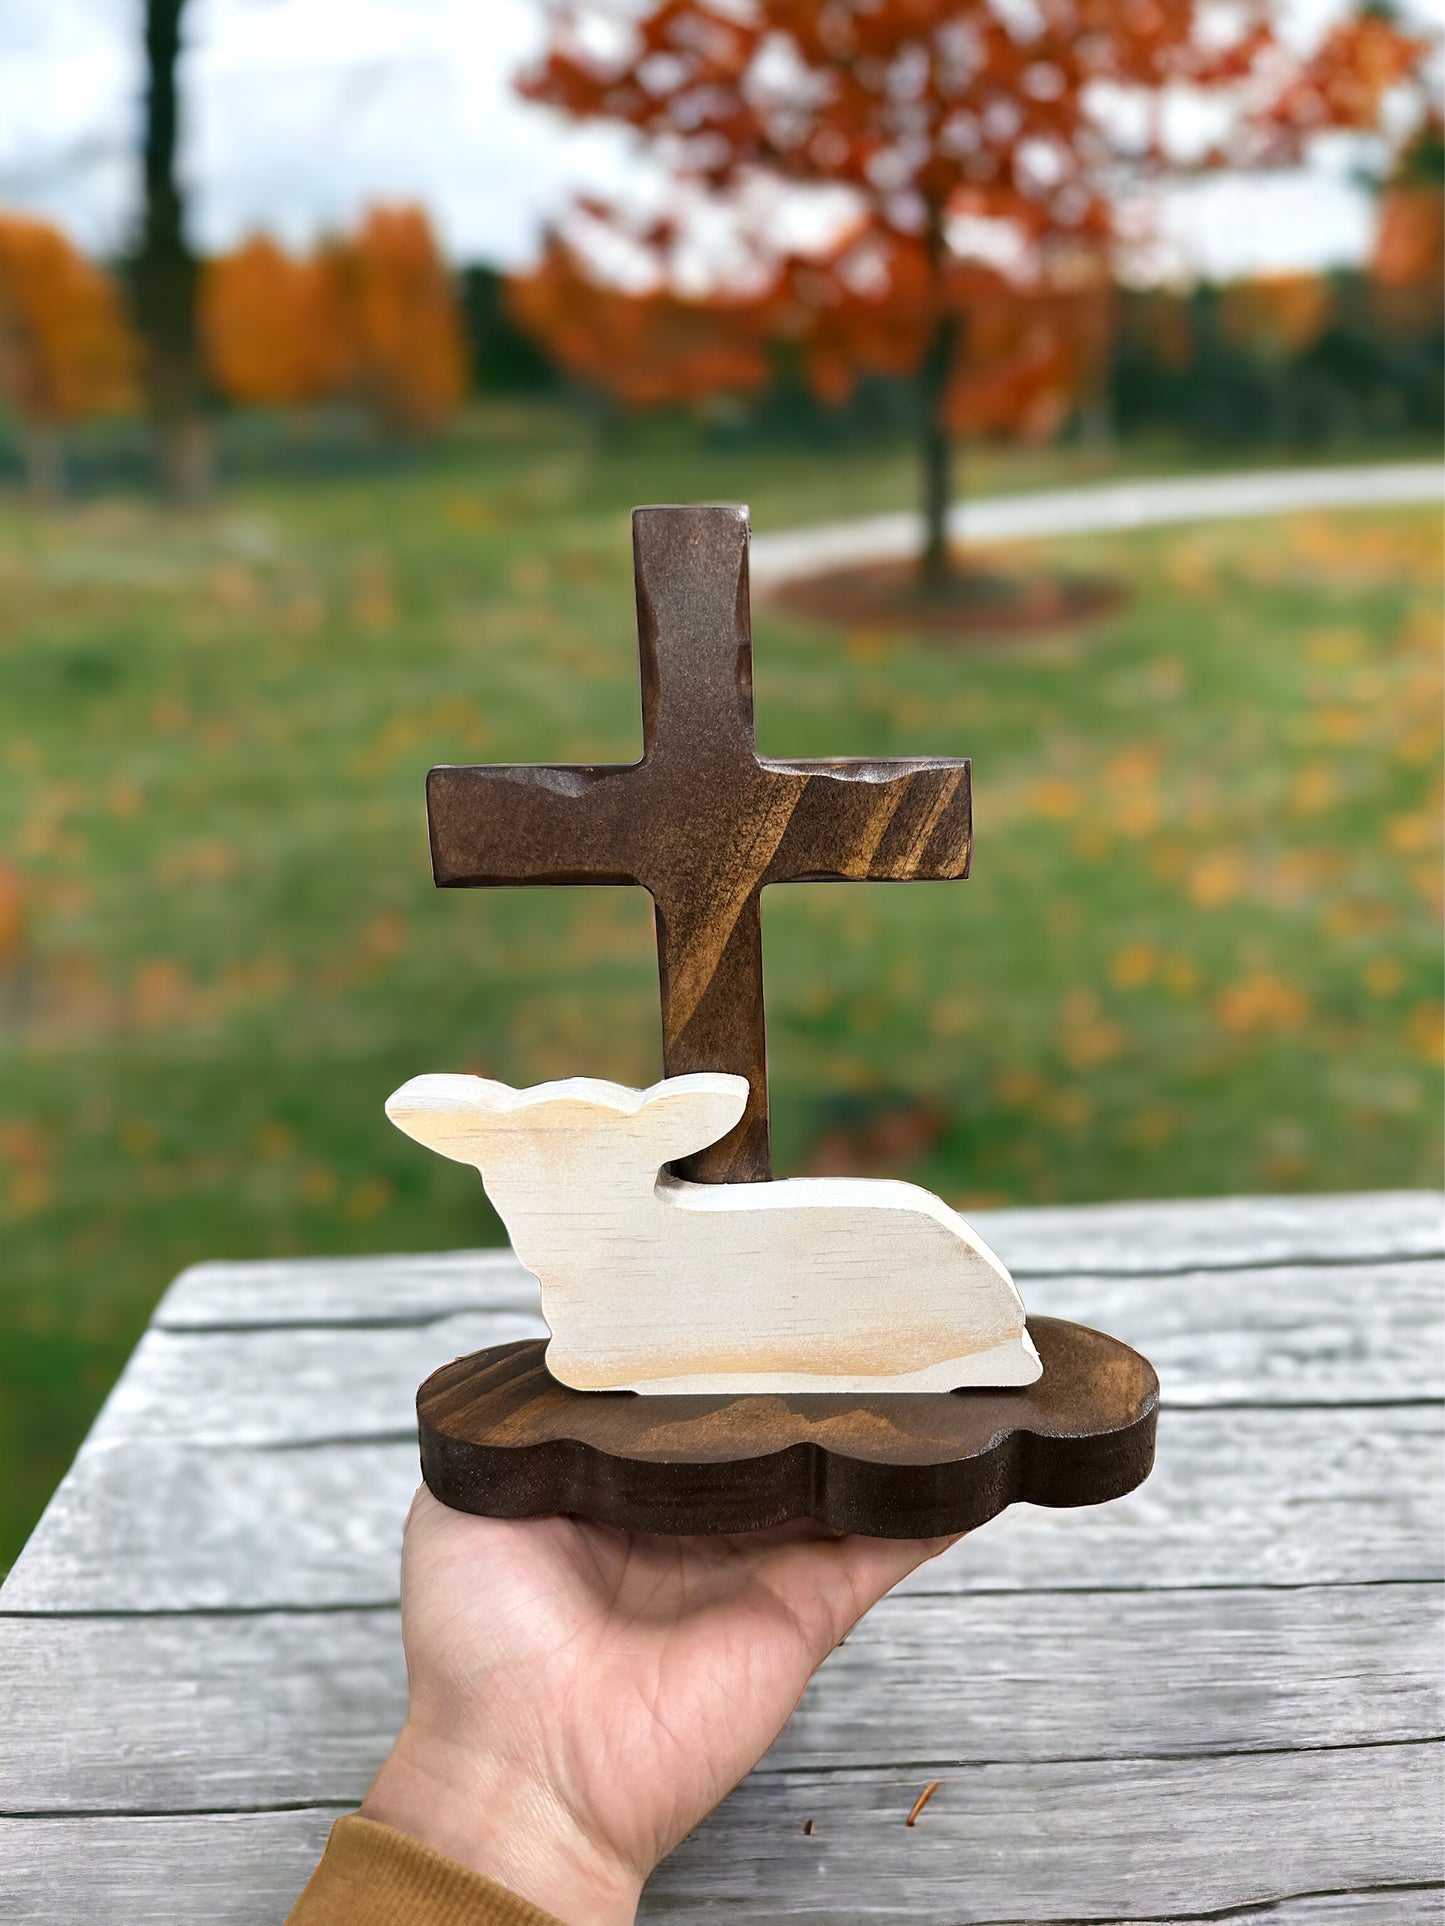 Cross and Lamb Wooden Easter Countertop Art, Easter decor Spring decor for home, shelf, table decor, Christians Easter Decor, Lamb & Cross